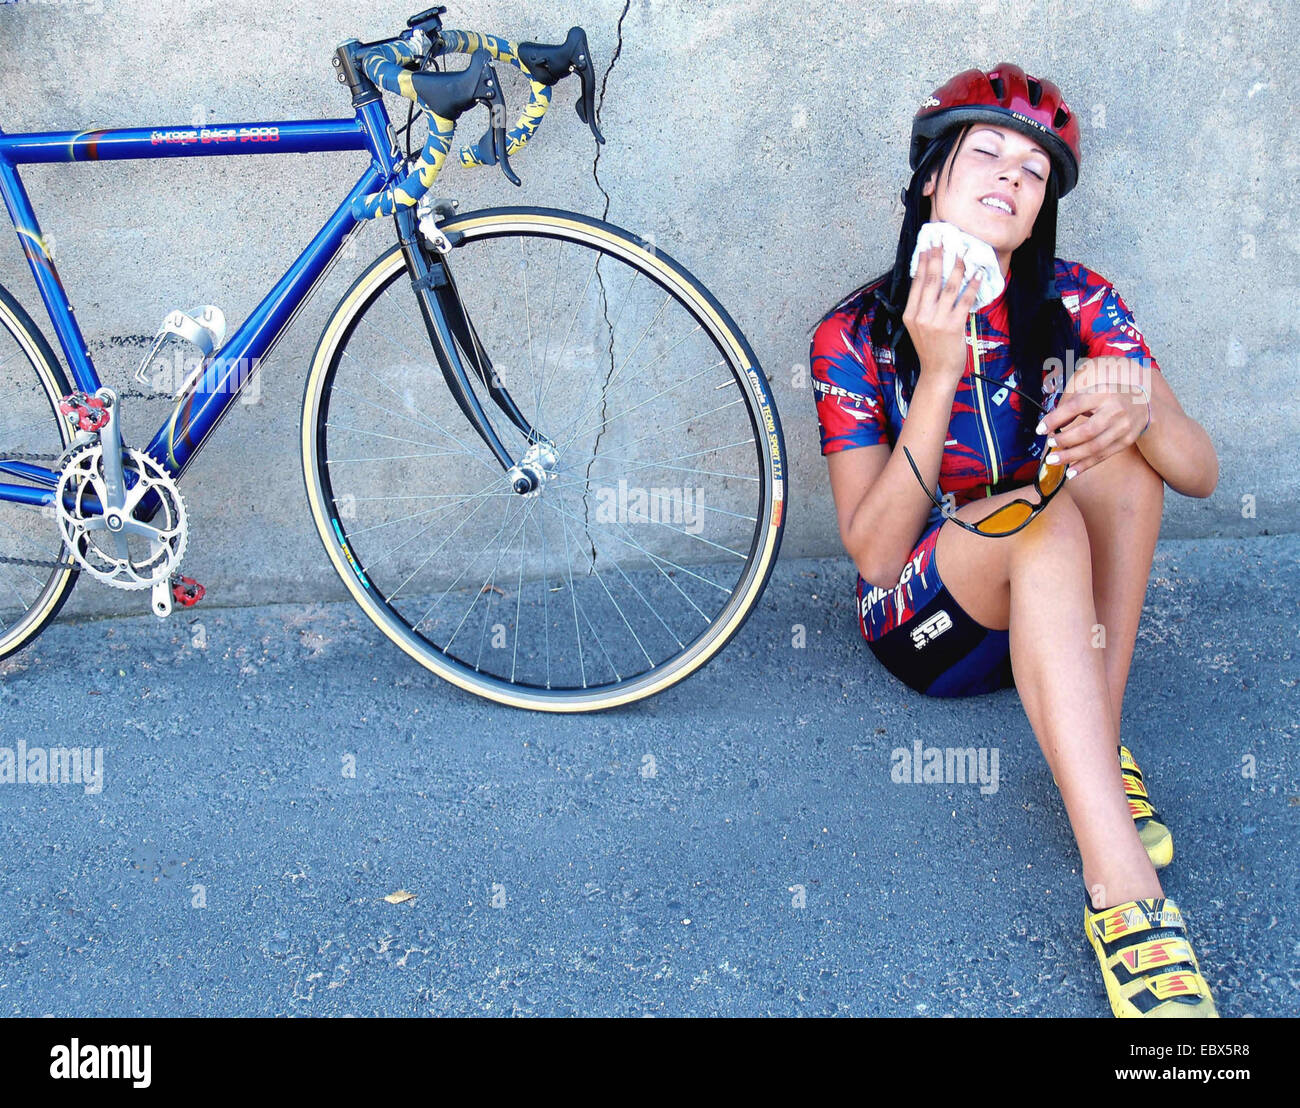 young cyclist sitting on the floor beside her racing bicycle drying her face with a handkerchief Stock Photo